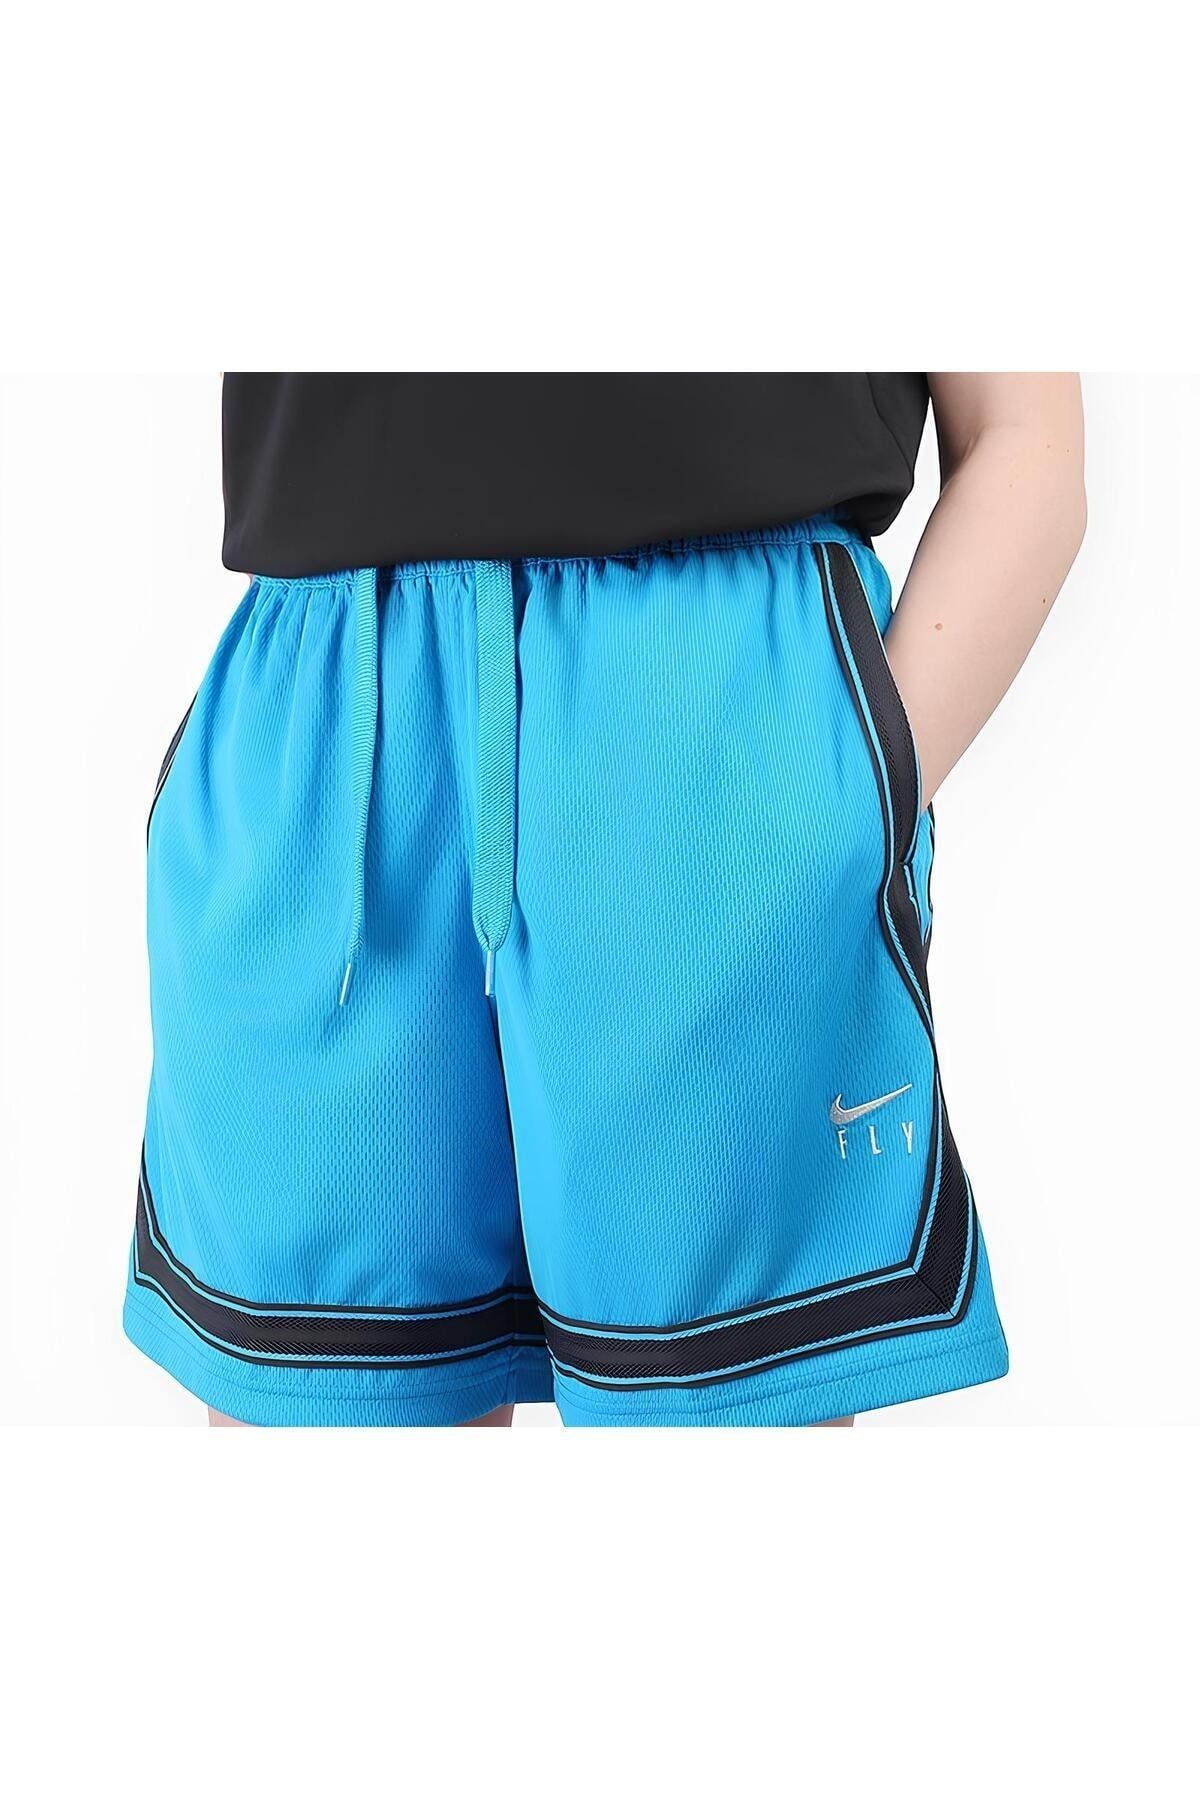 Women's Nike Fly Crossover Basketball Shorts